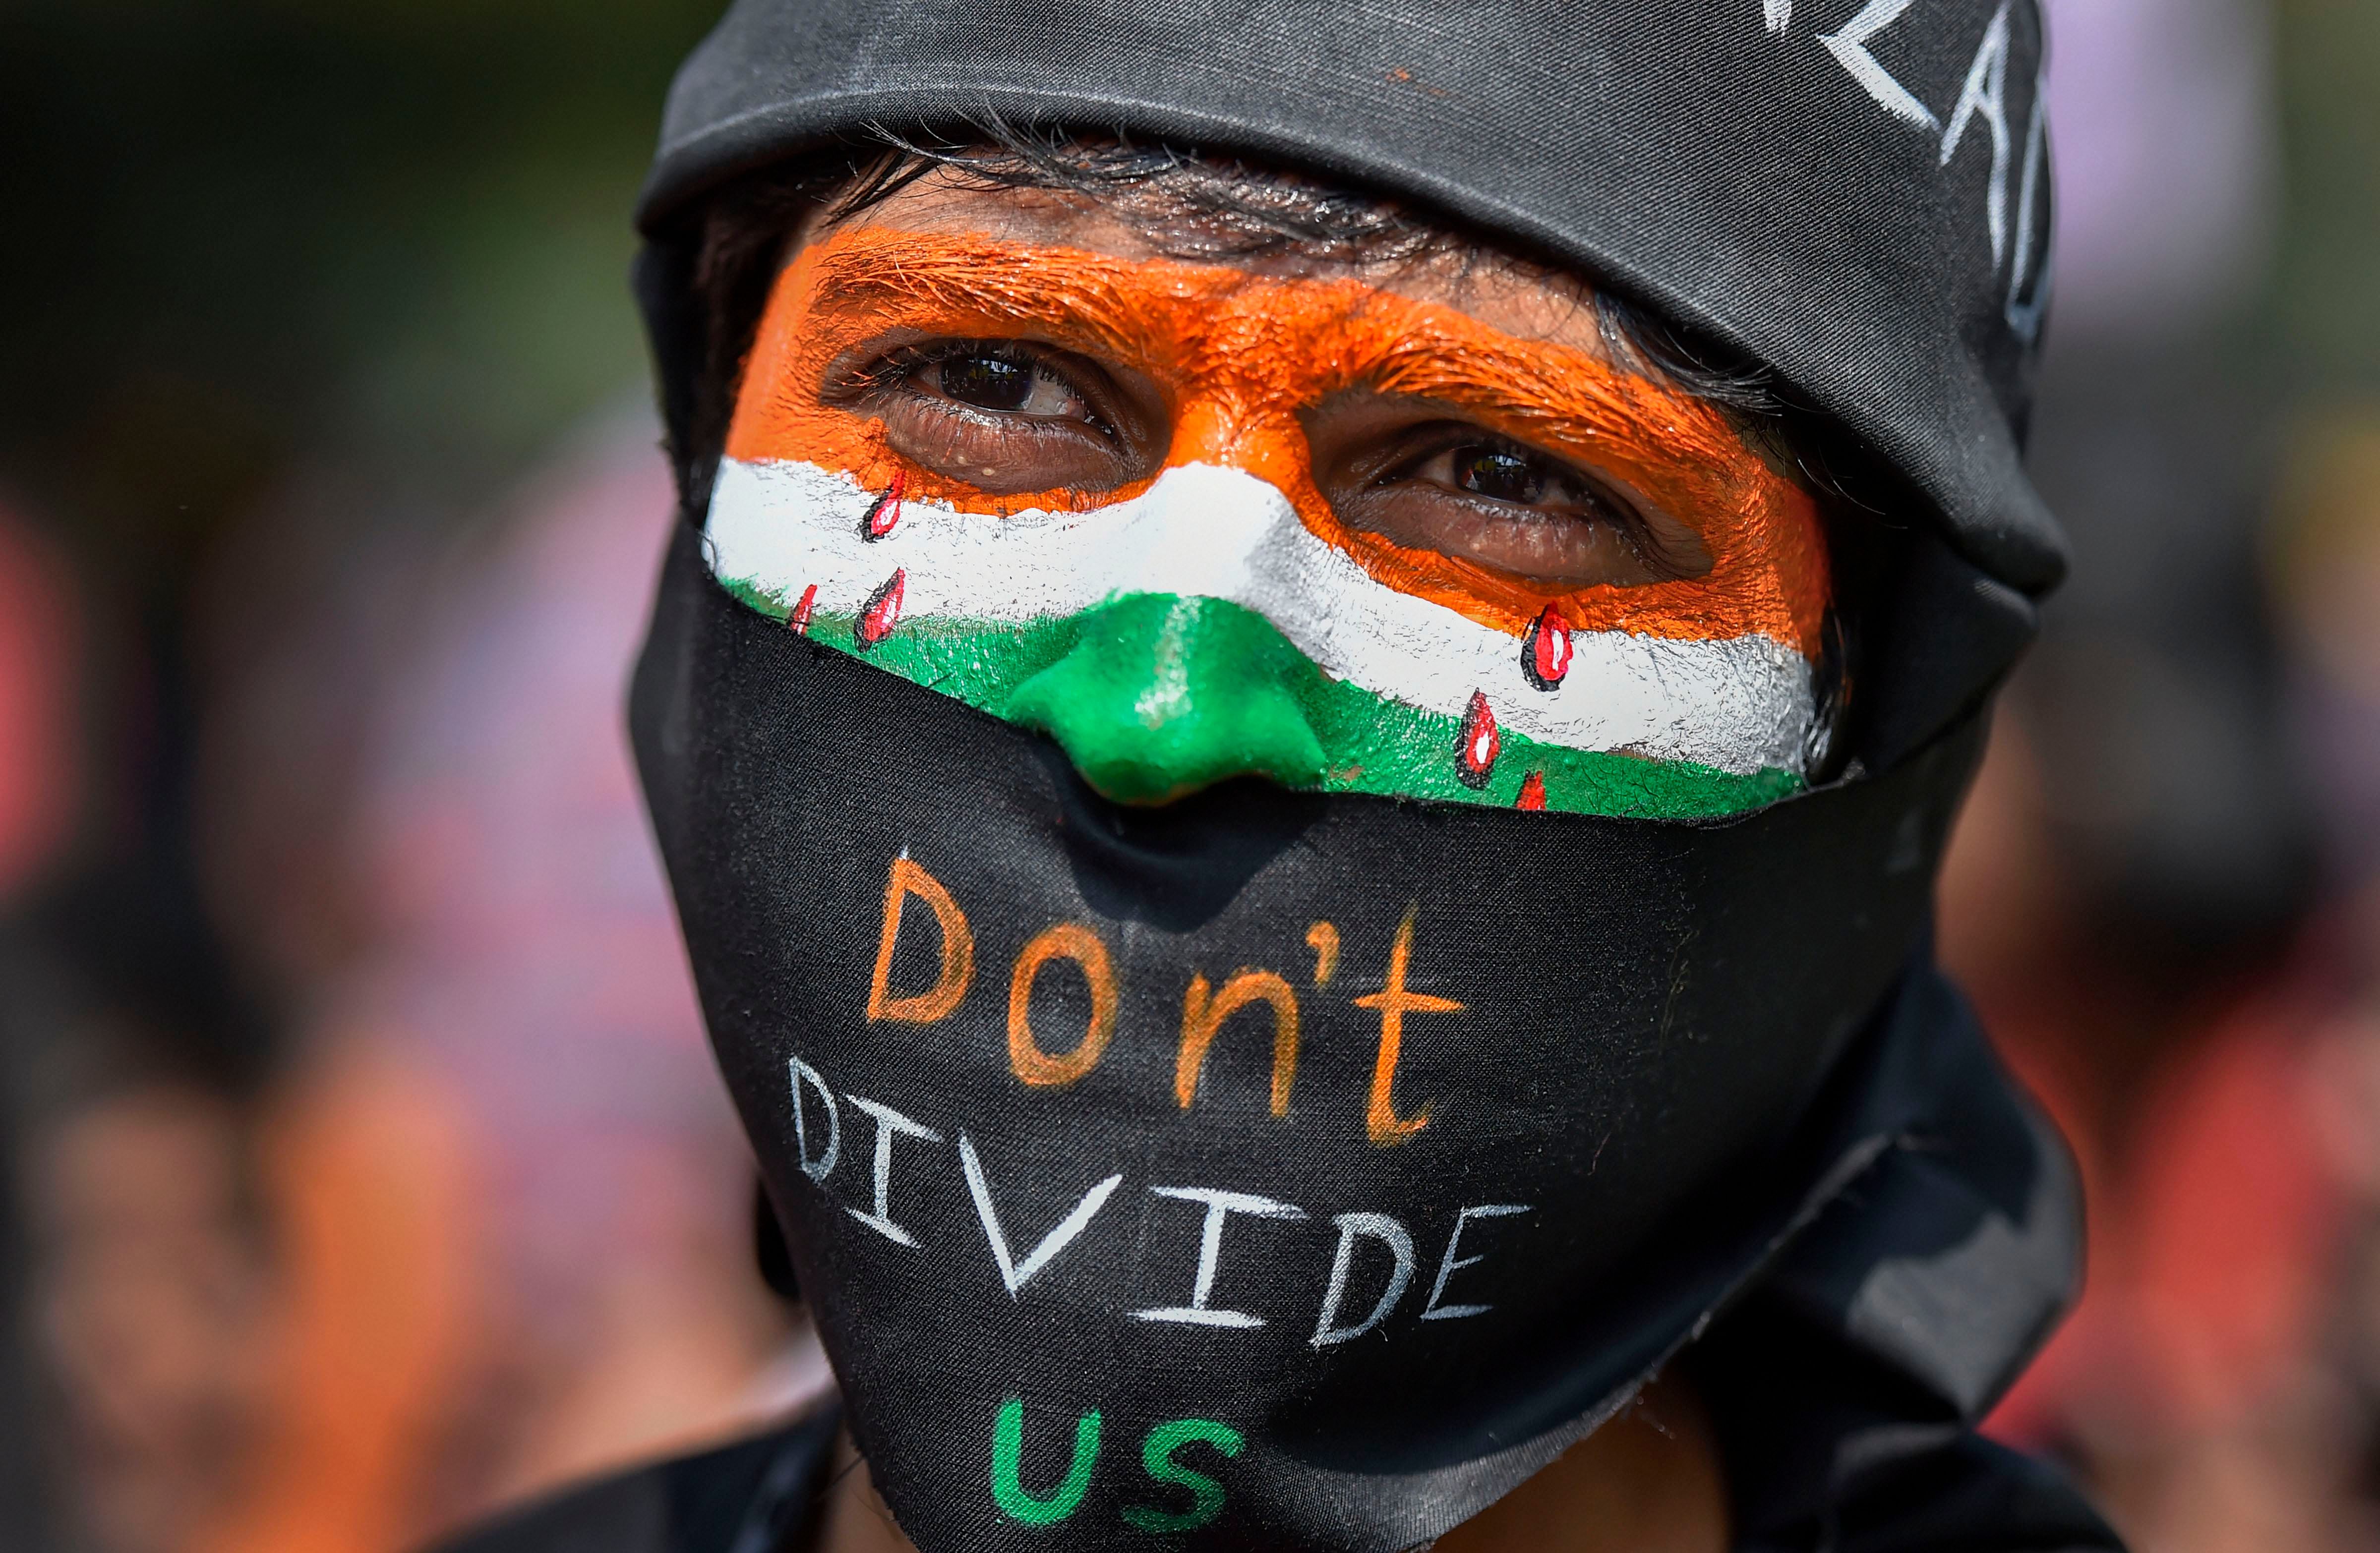 A protestor participates in a demonstration 'Delhi Chalo' against Citizenship (Amendment) Act (CAA) , National Register of Citizens (NRC) and National Population Register (NPR). (PTI Photo)